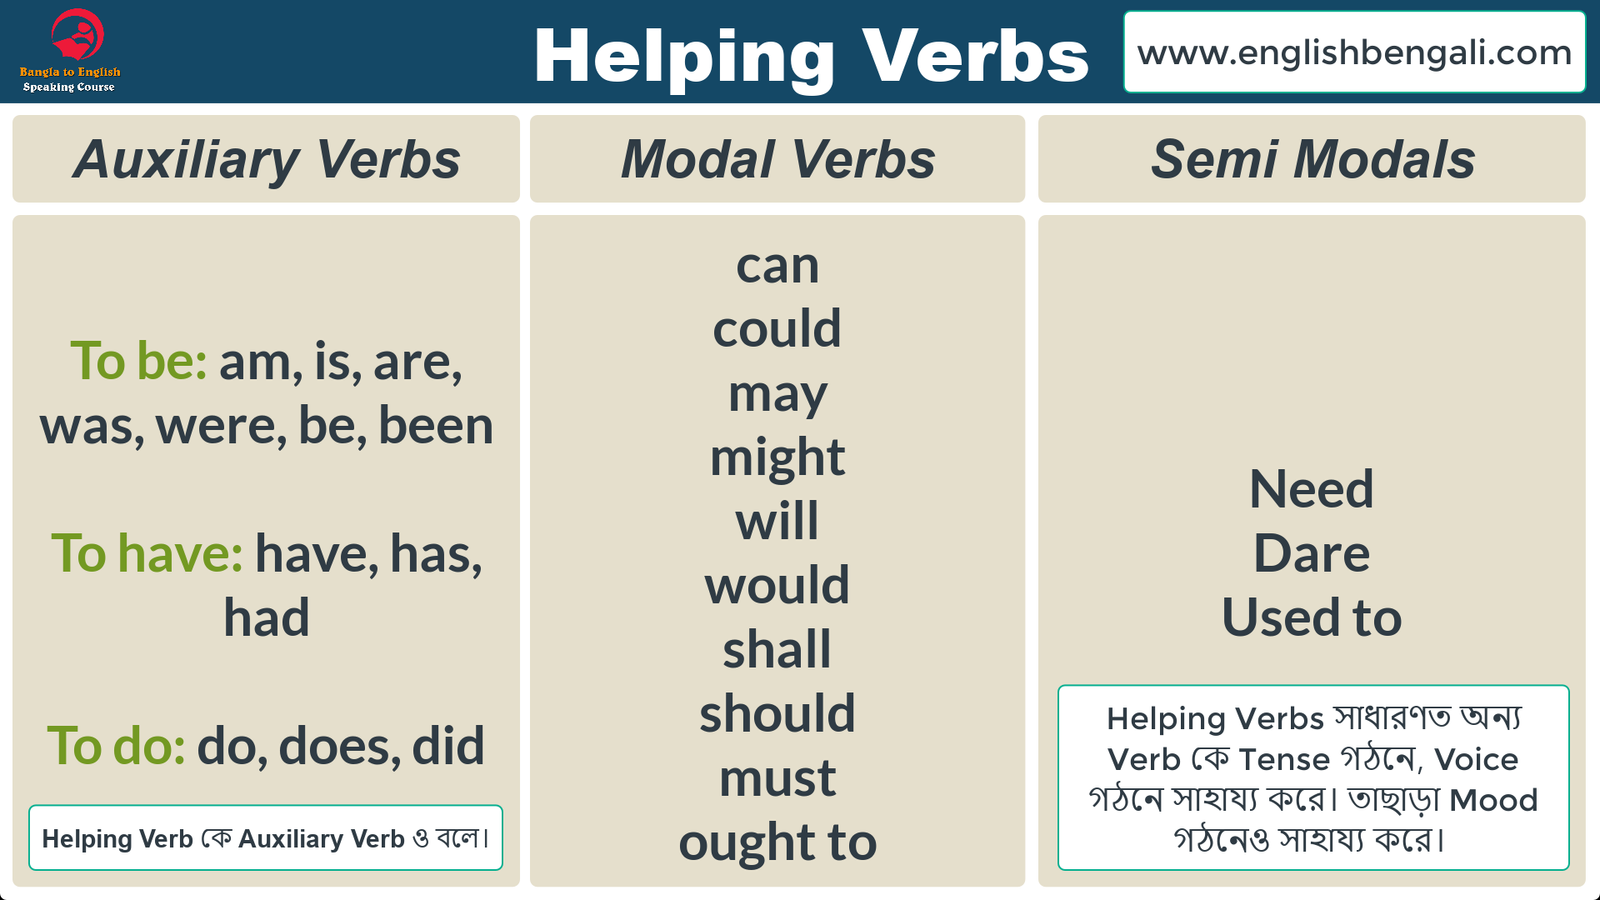 What Are The 15 Other Helping Verbs